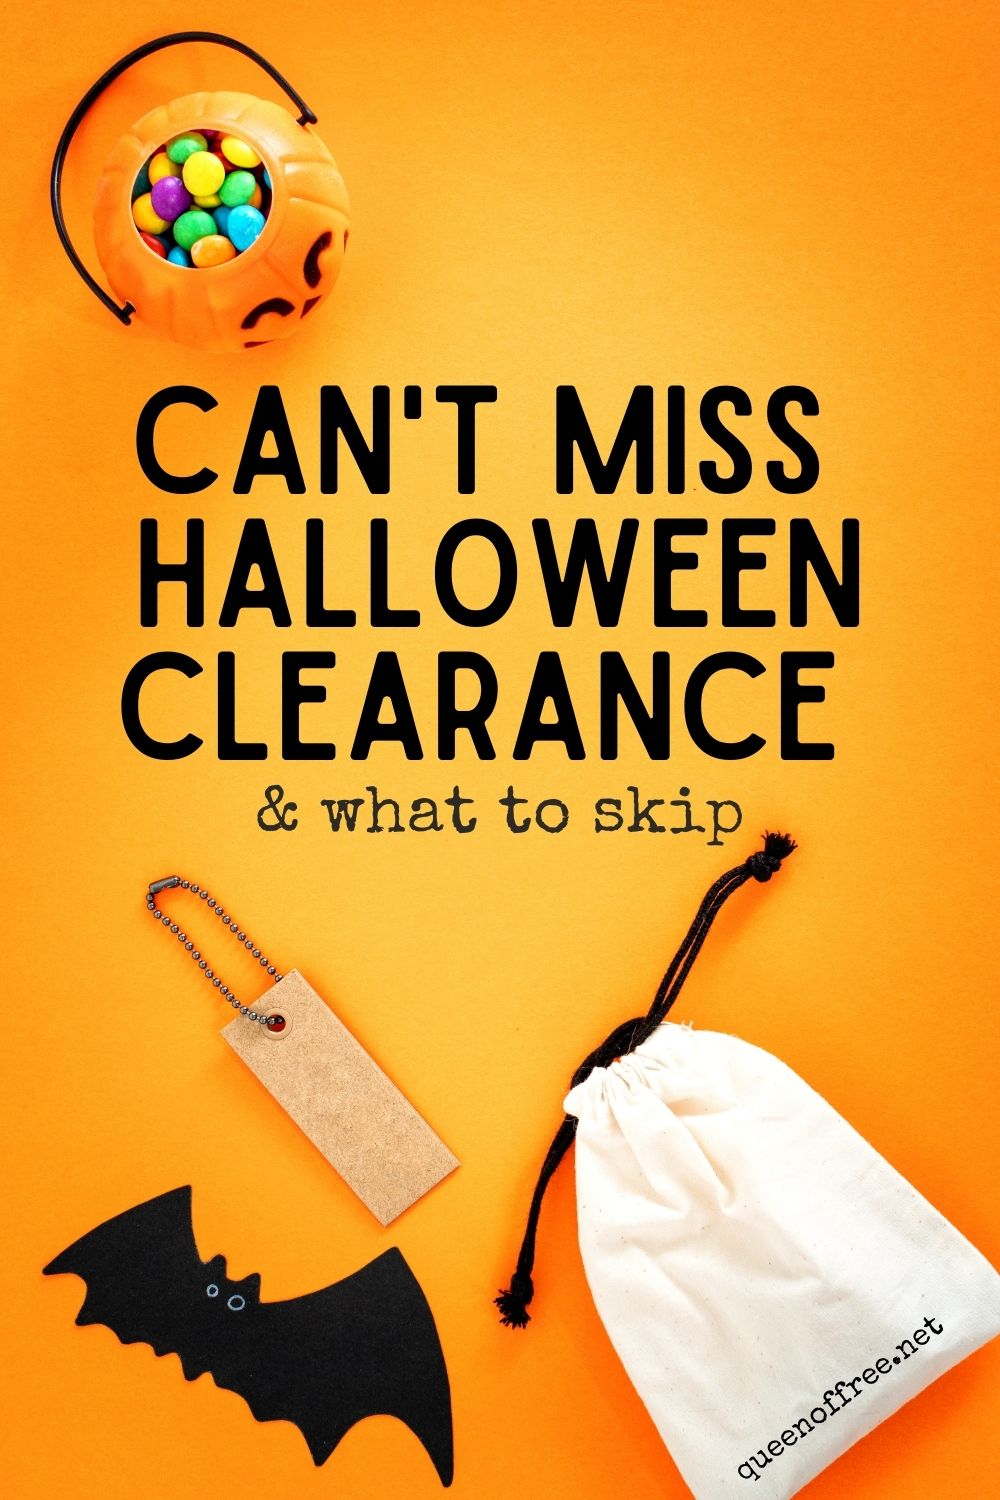 "Spooky proof" your budget with these last minute Halloween money saving tips and Halloween Clearance deals you can't miss!